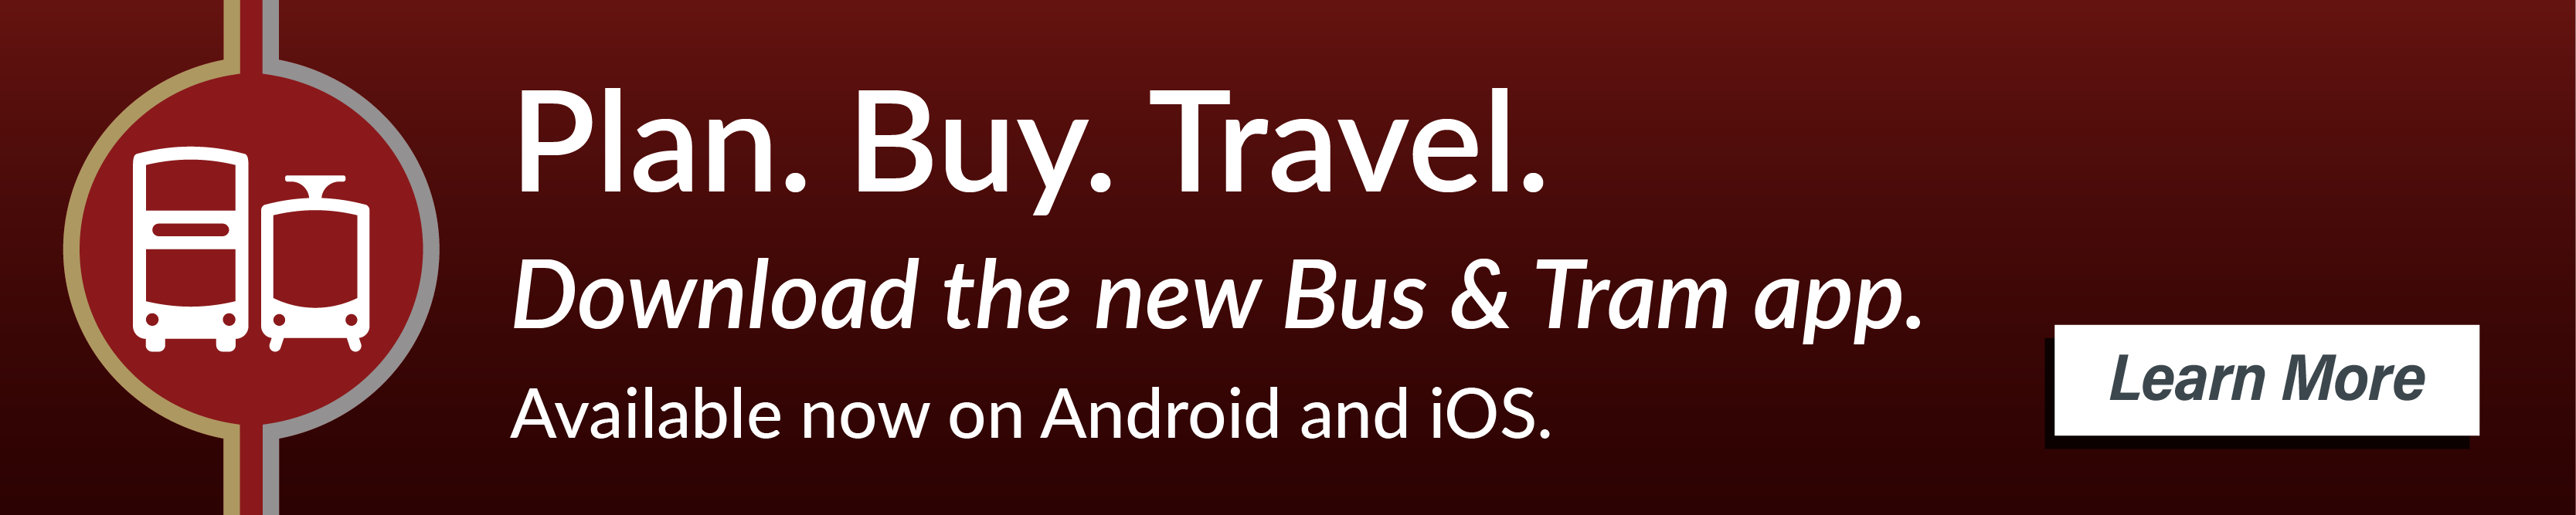 Plan. Buy. Travel. Your journey starts here. For integrated ticketing, journey planning and live departures all in one, download the Bus & Tram mobile app. Available now on Android and iOS. Learn more.